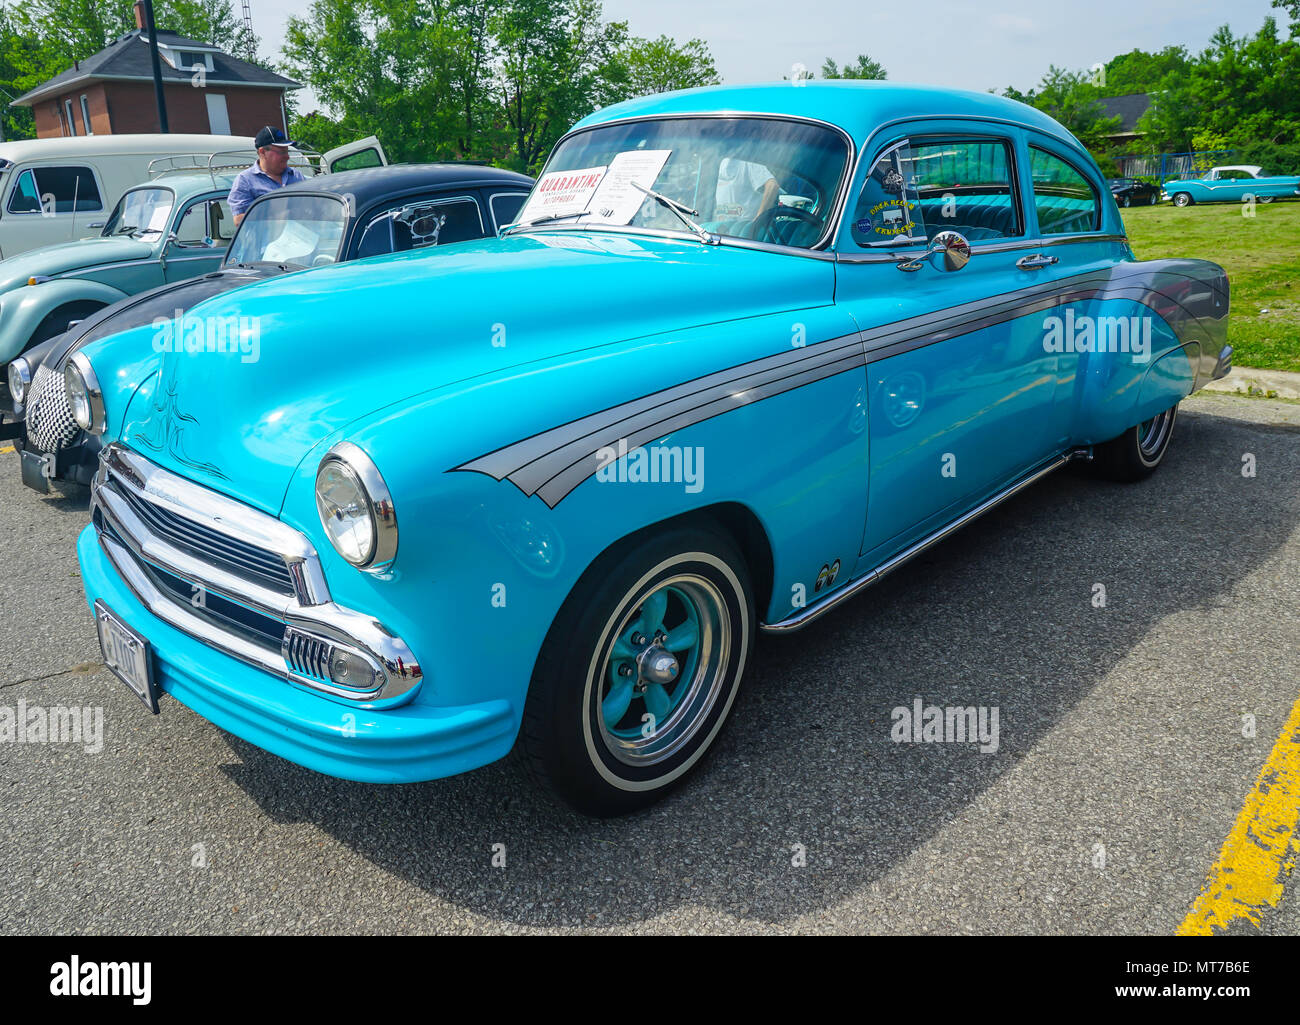 1950 Cheverolet,Old vintage cars at antique car exhibition in Ontario,Canada Stock Photo